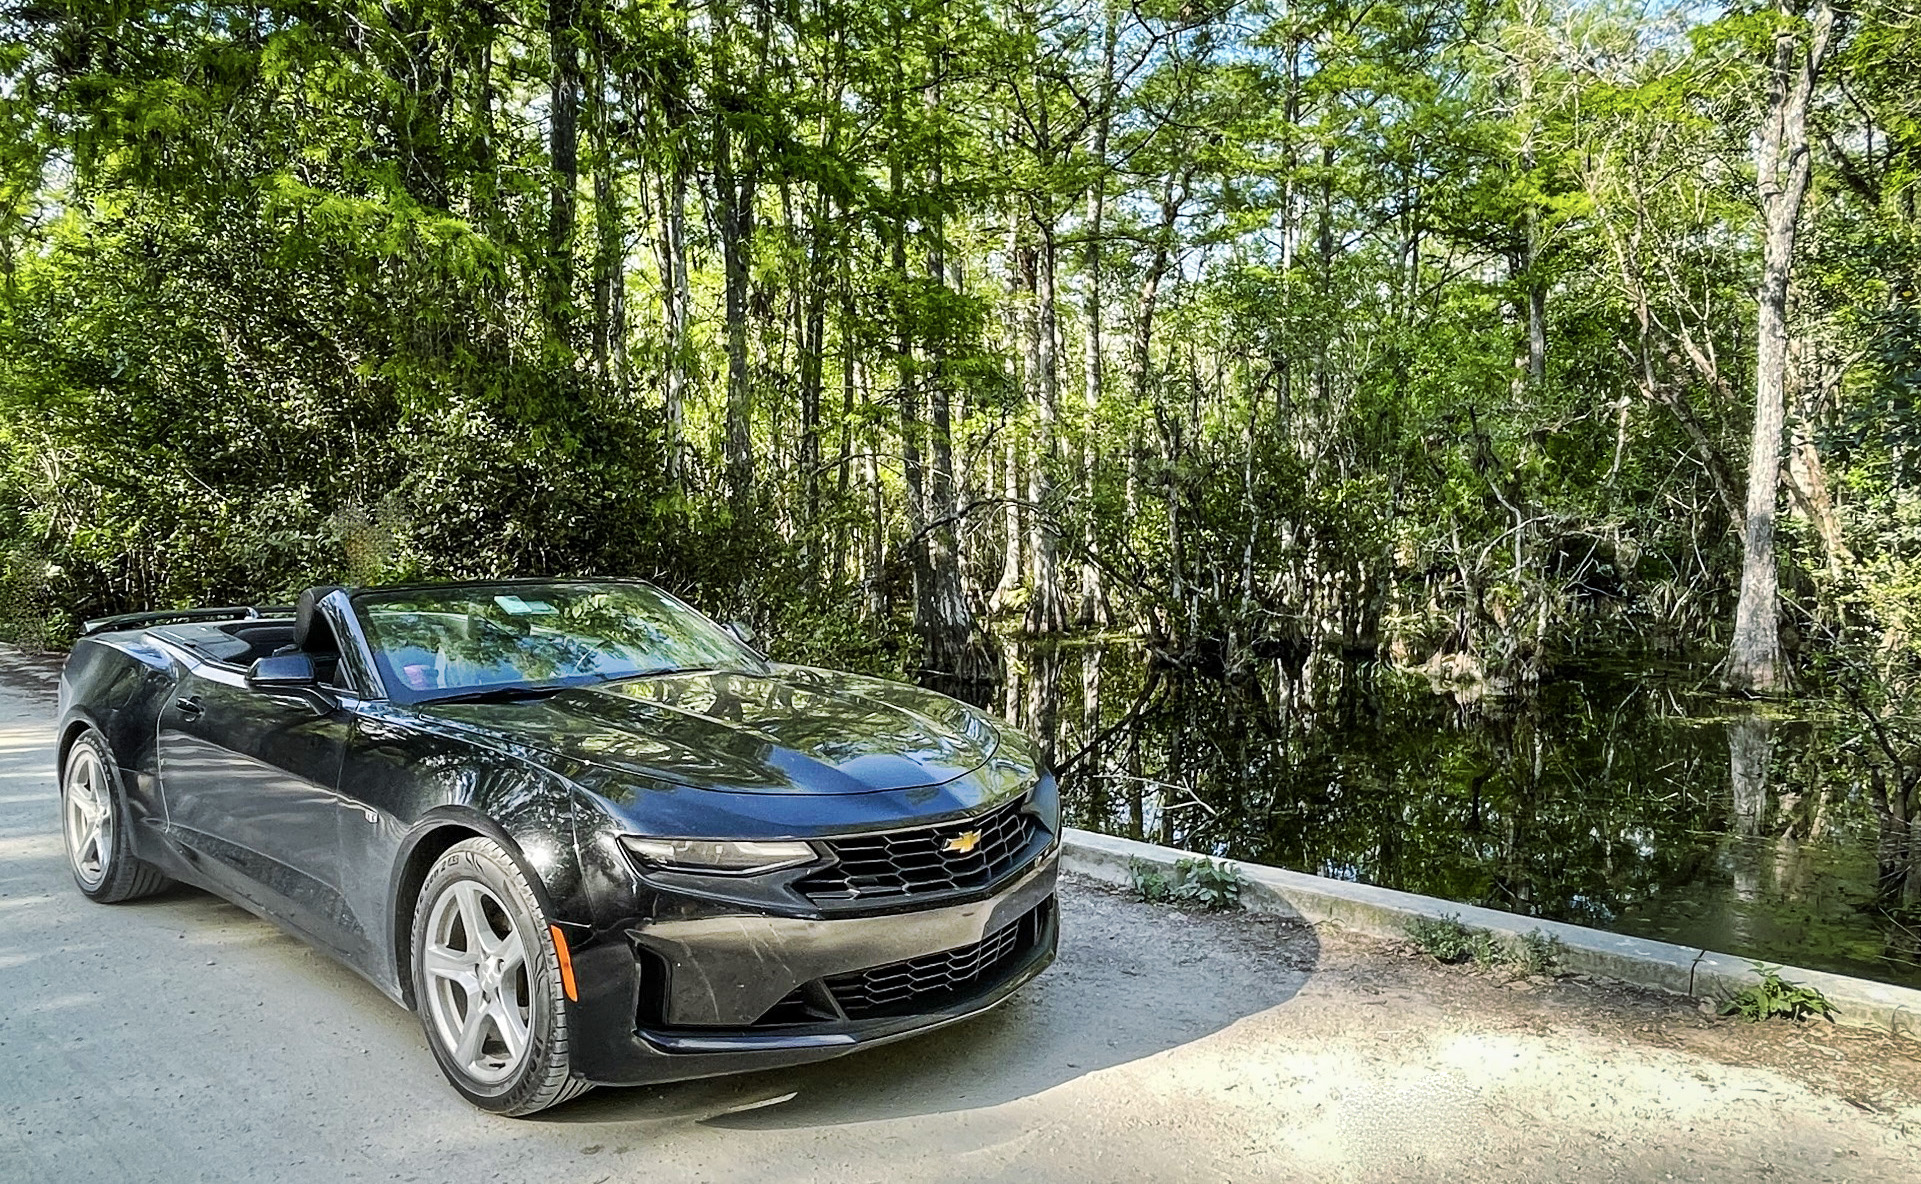 Road Trip: On the Tamiami Trail of Bob Dylan and Pablo Picasso in a Camaro Convertible